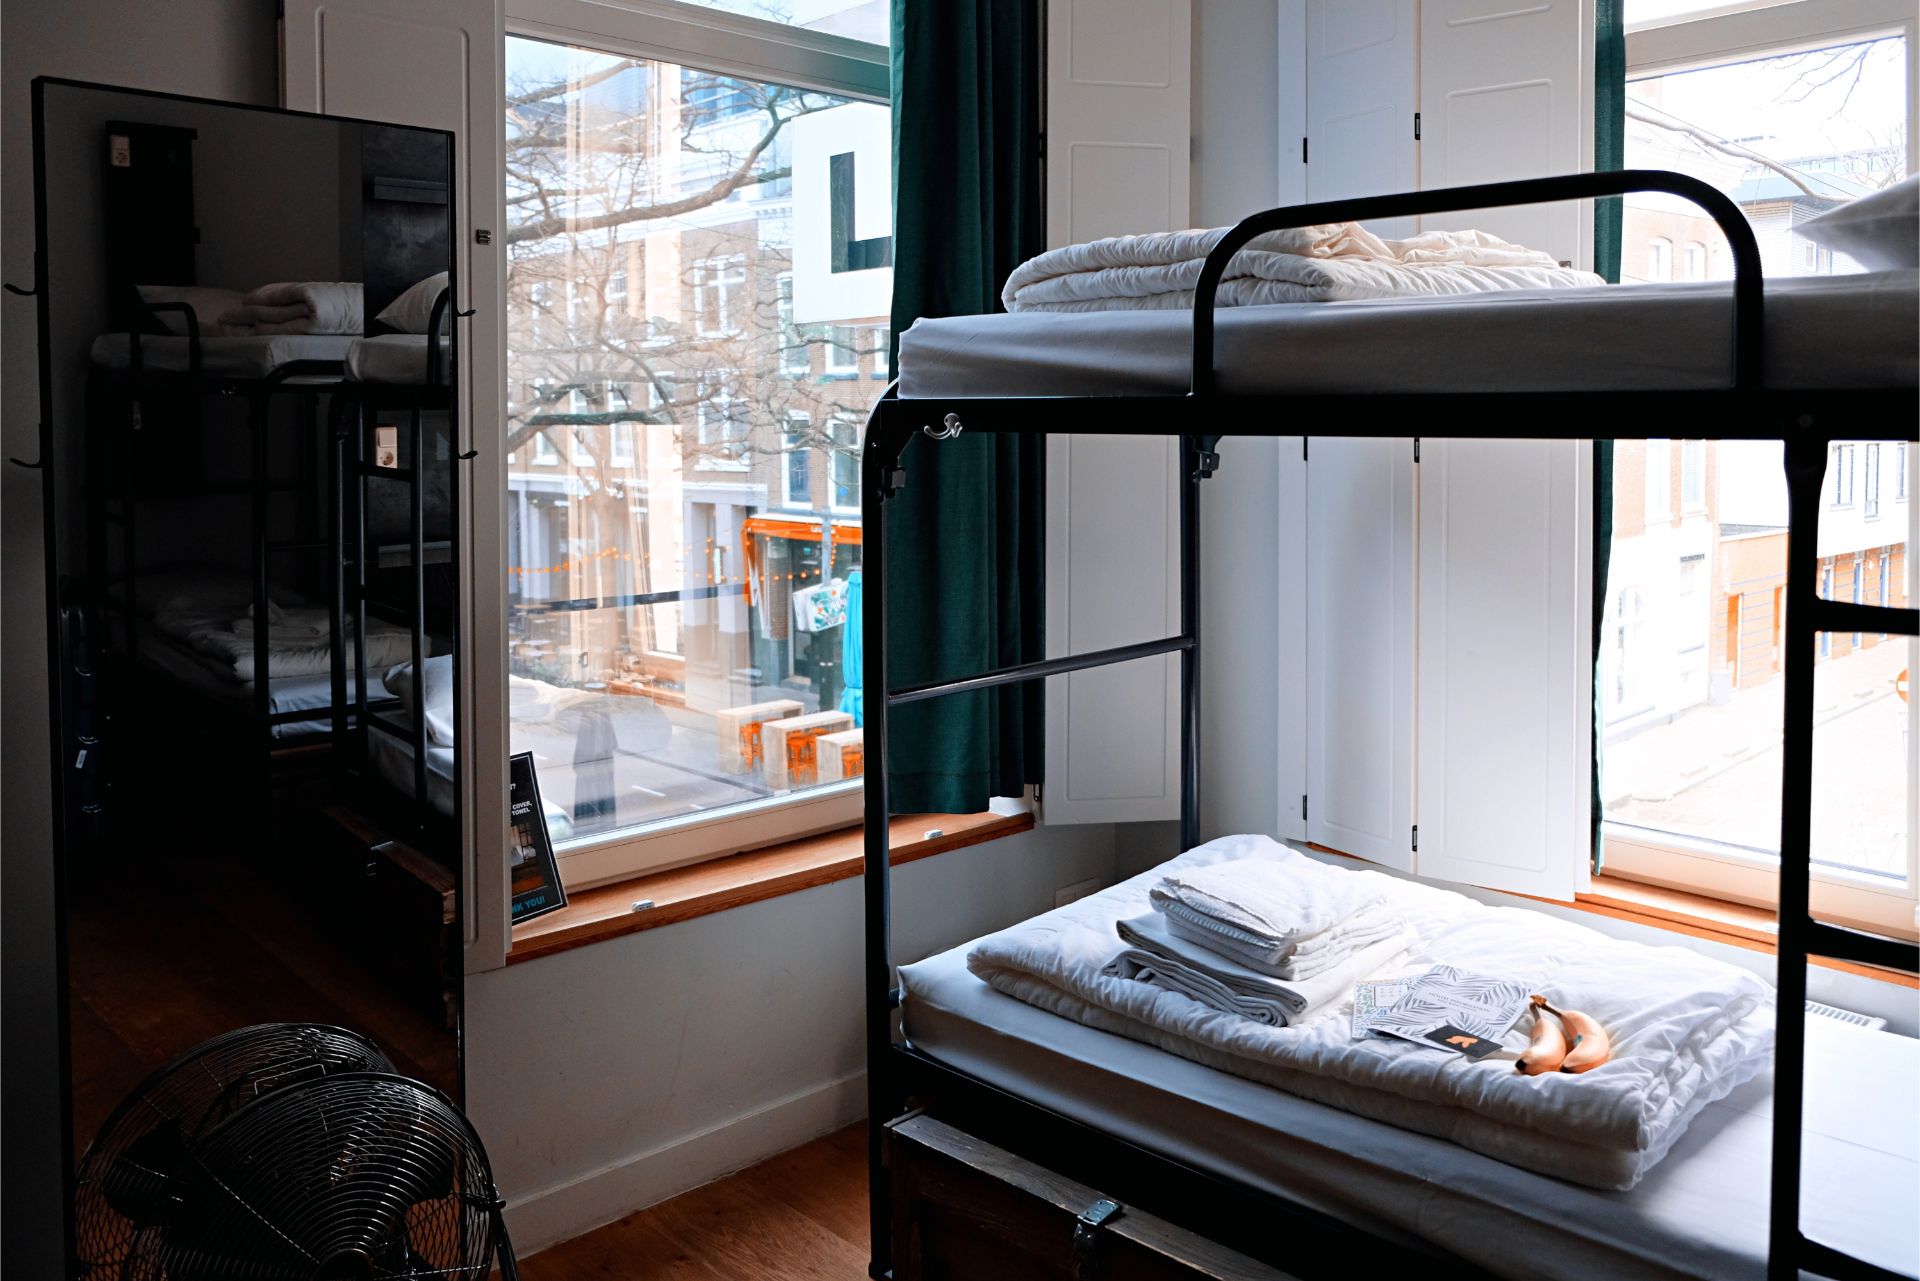 bunk-beds-with-white-linen-and-towels-in-a-hostel-room-in-a-city-sustainable-travel-tips